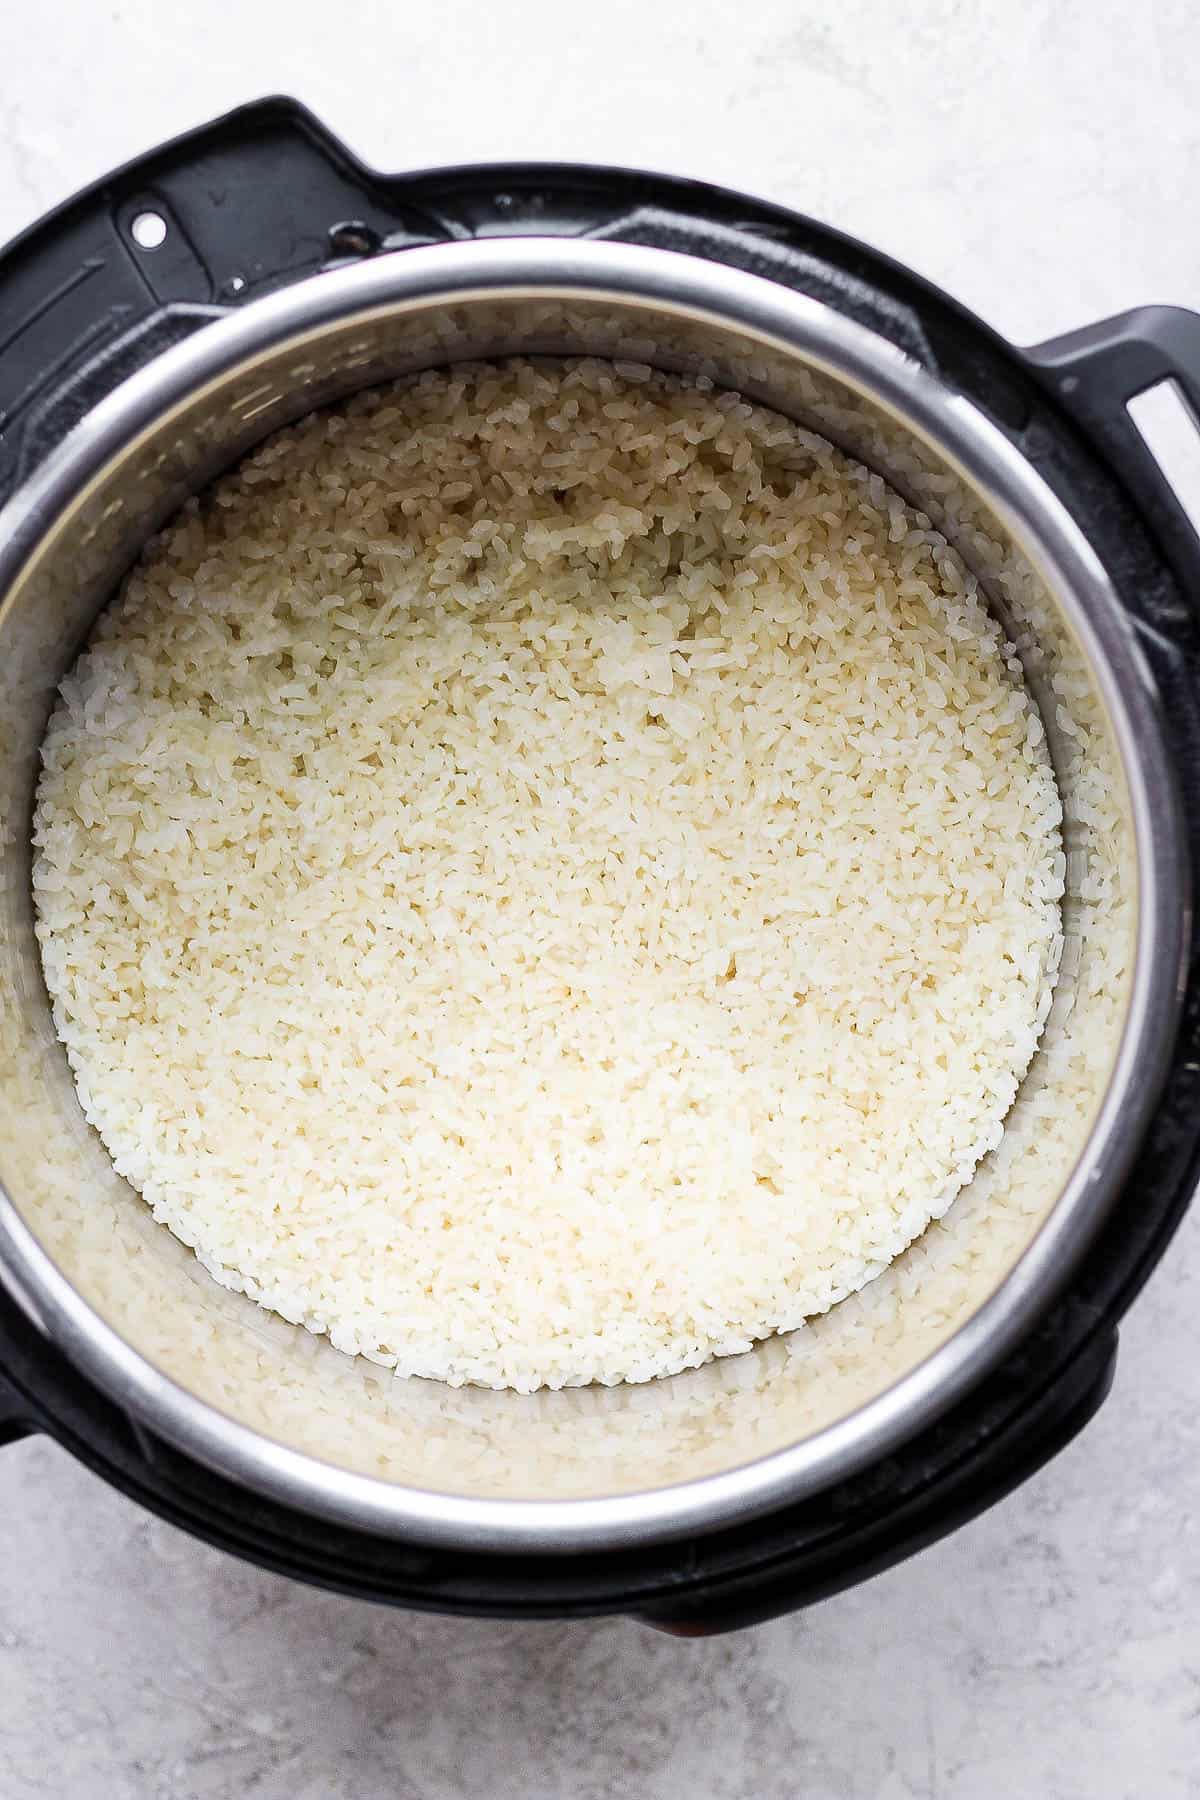 Fully cooked sushi rice in the Instant Pot.